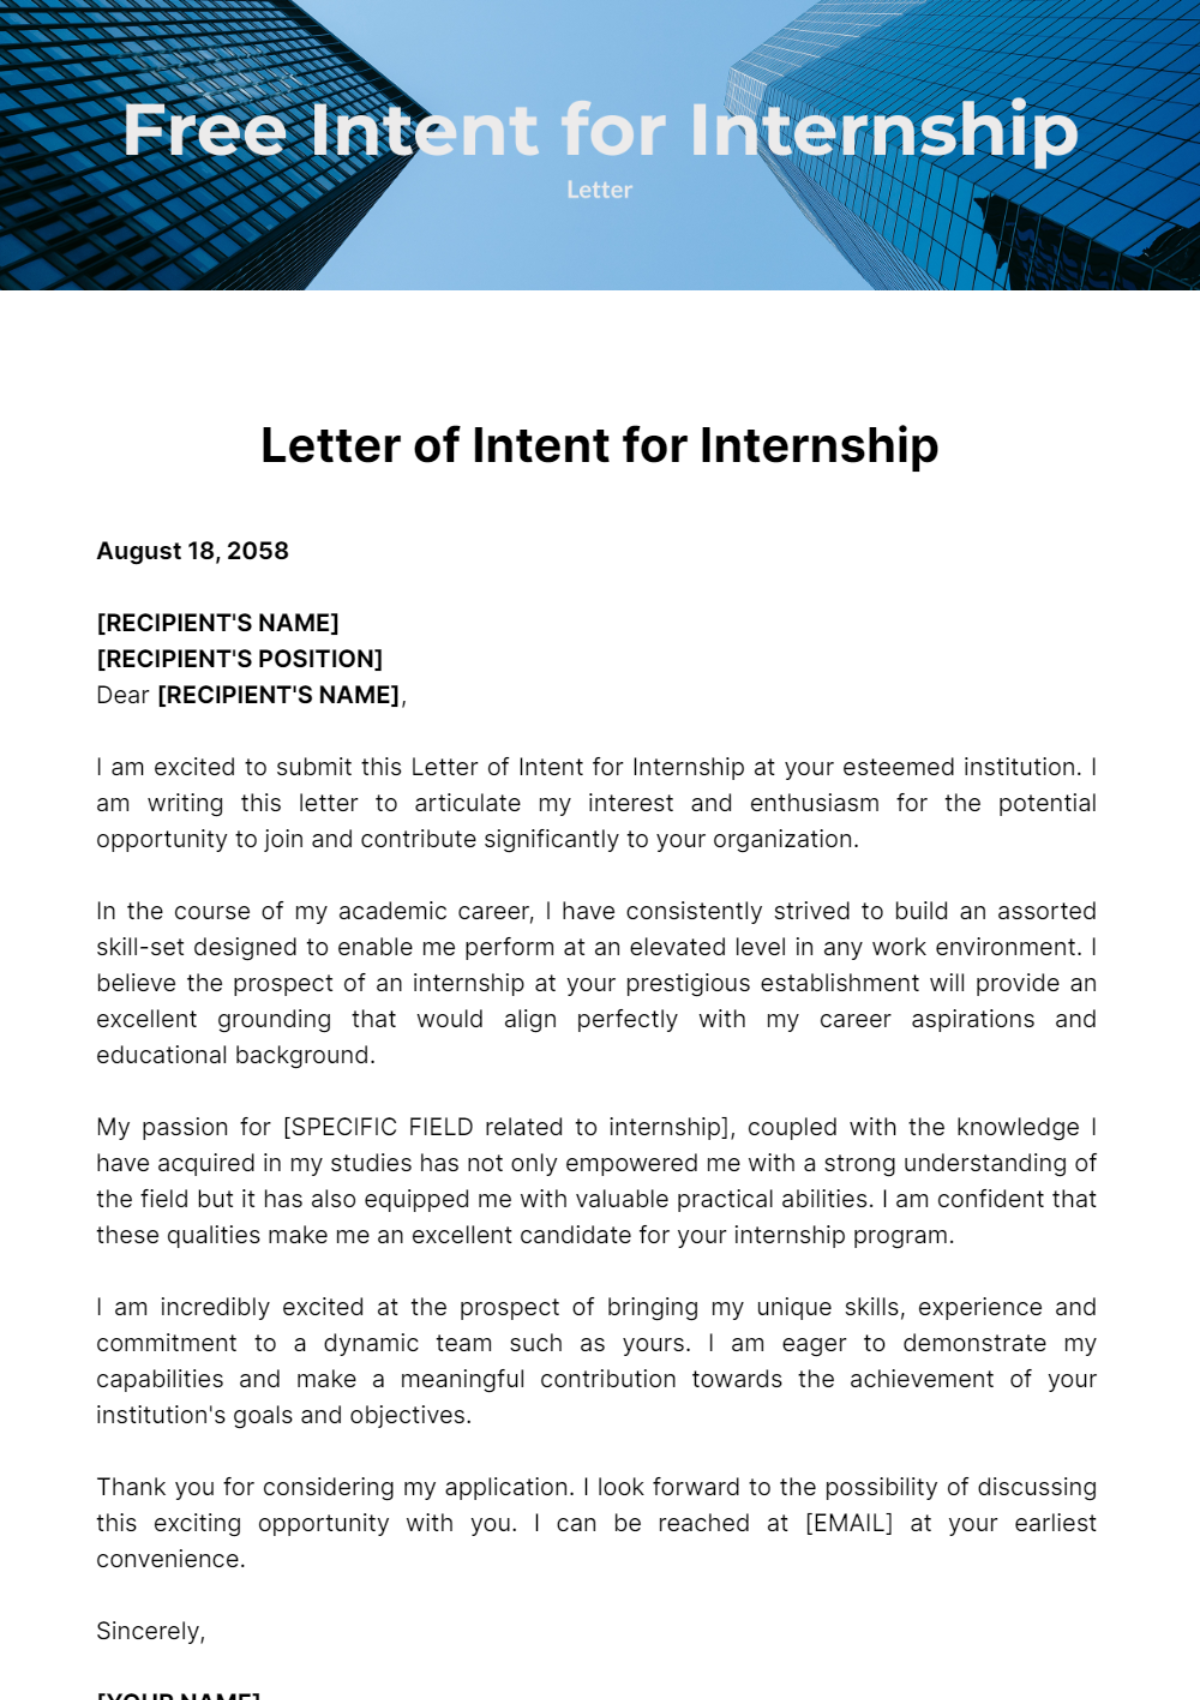 Free Letter of Intent for Internship Template